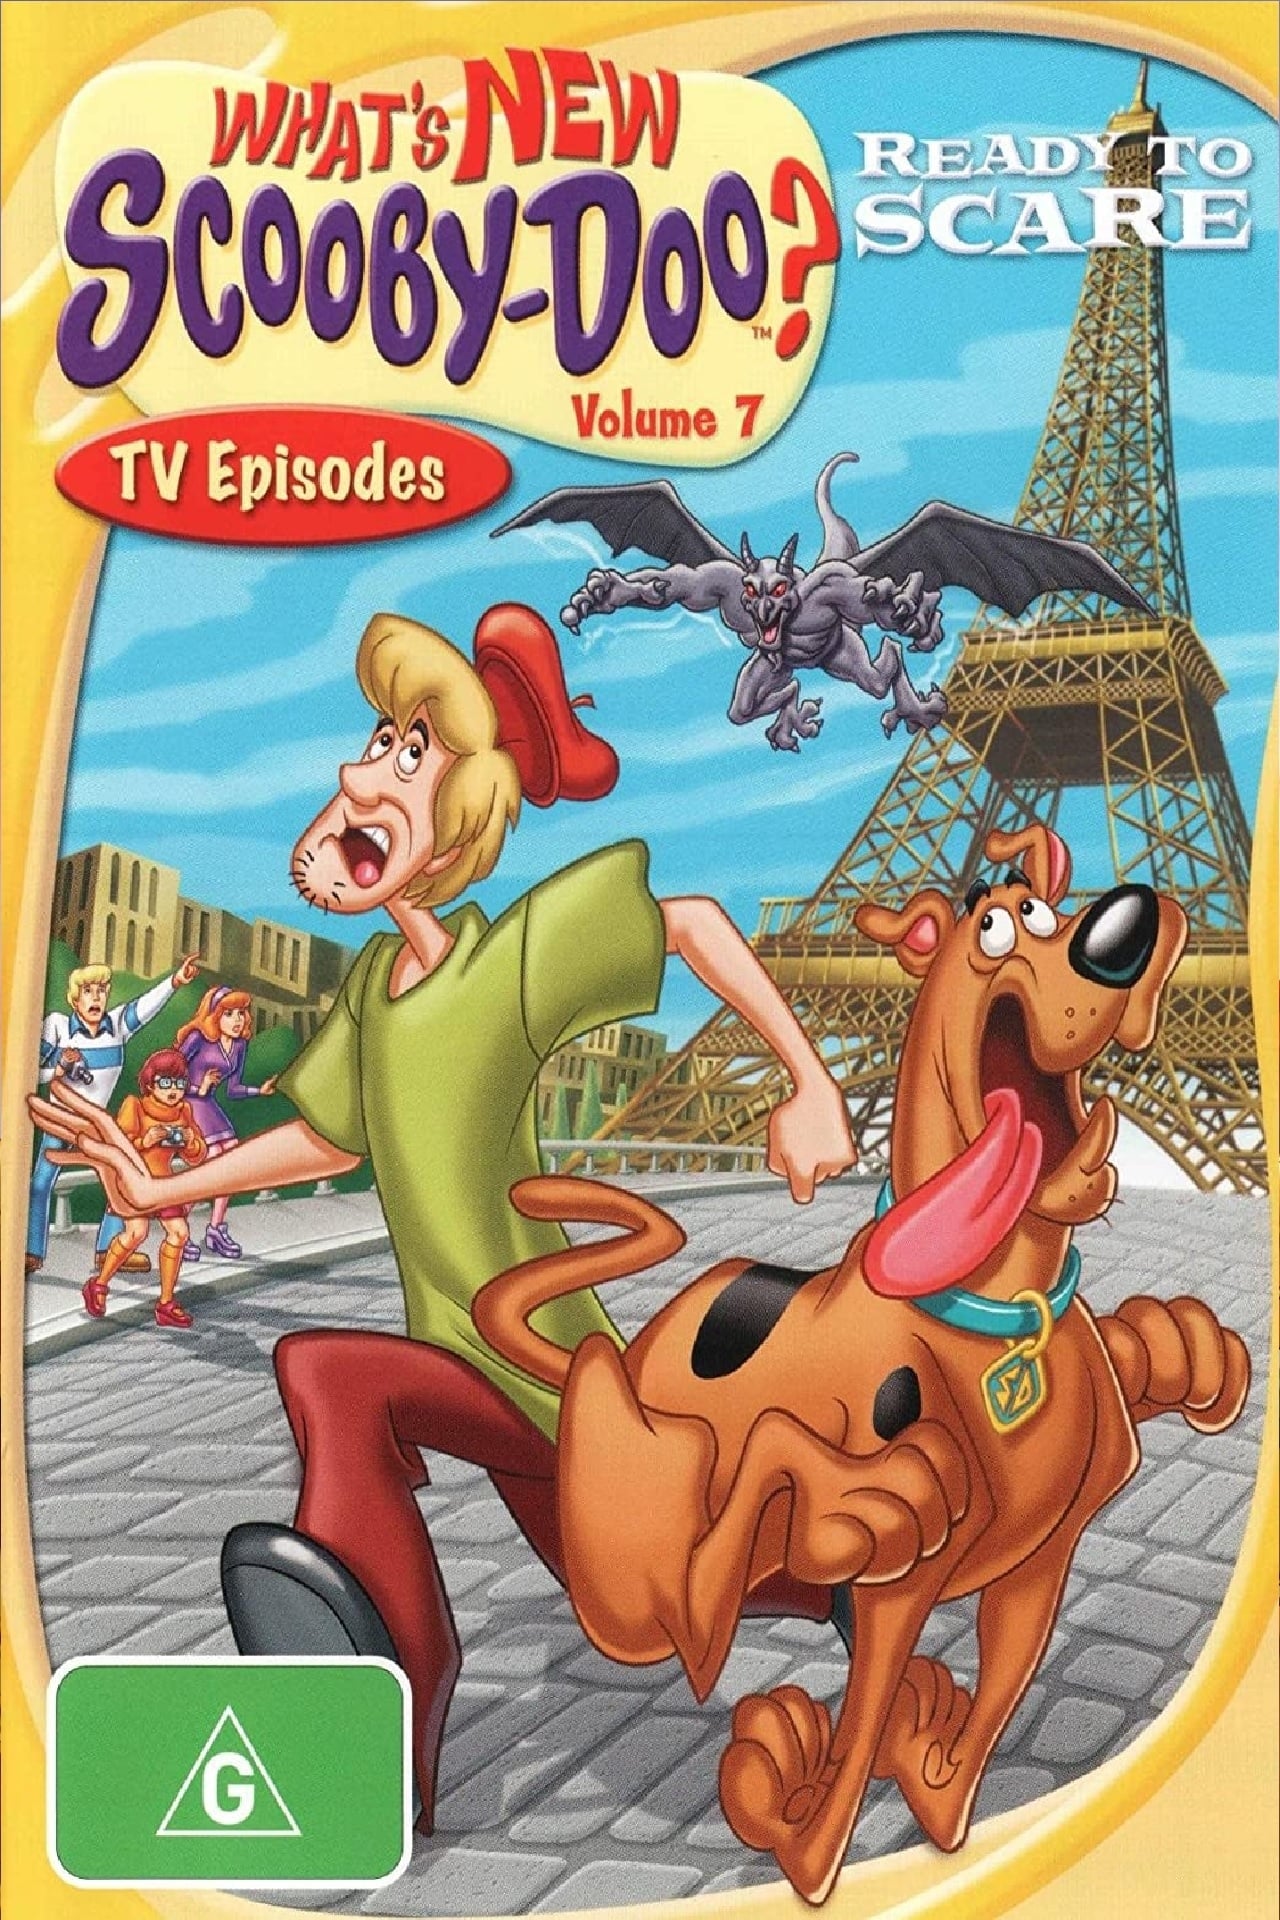 What's New, Scooby-Doo? Vol. 7: Ready to Scare (2006)